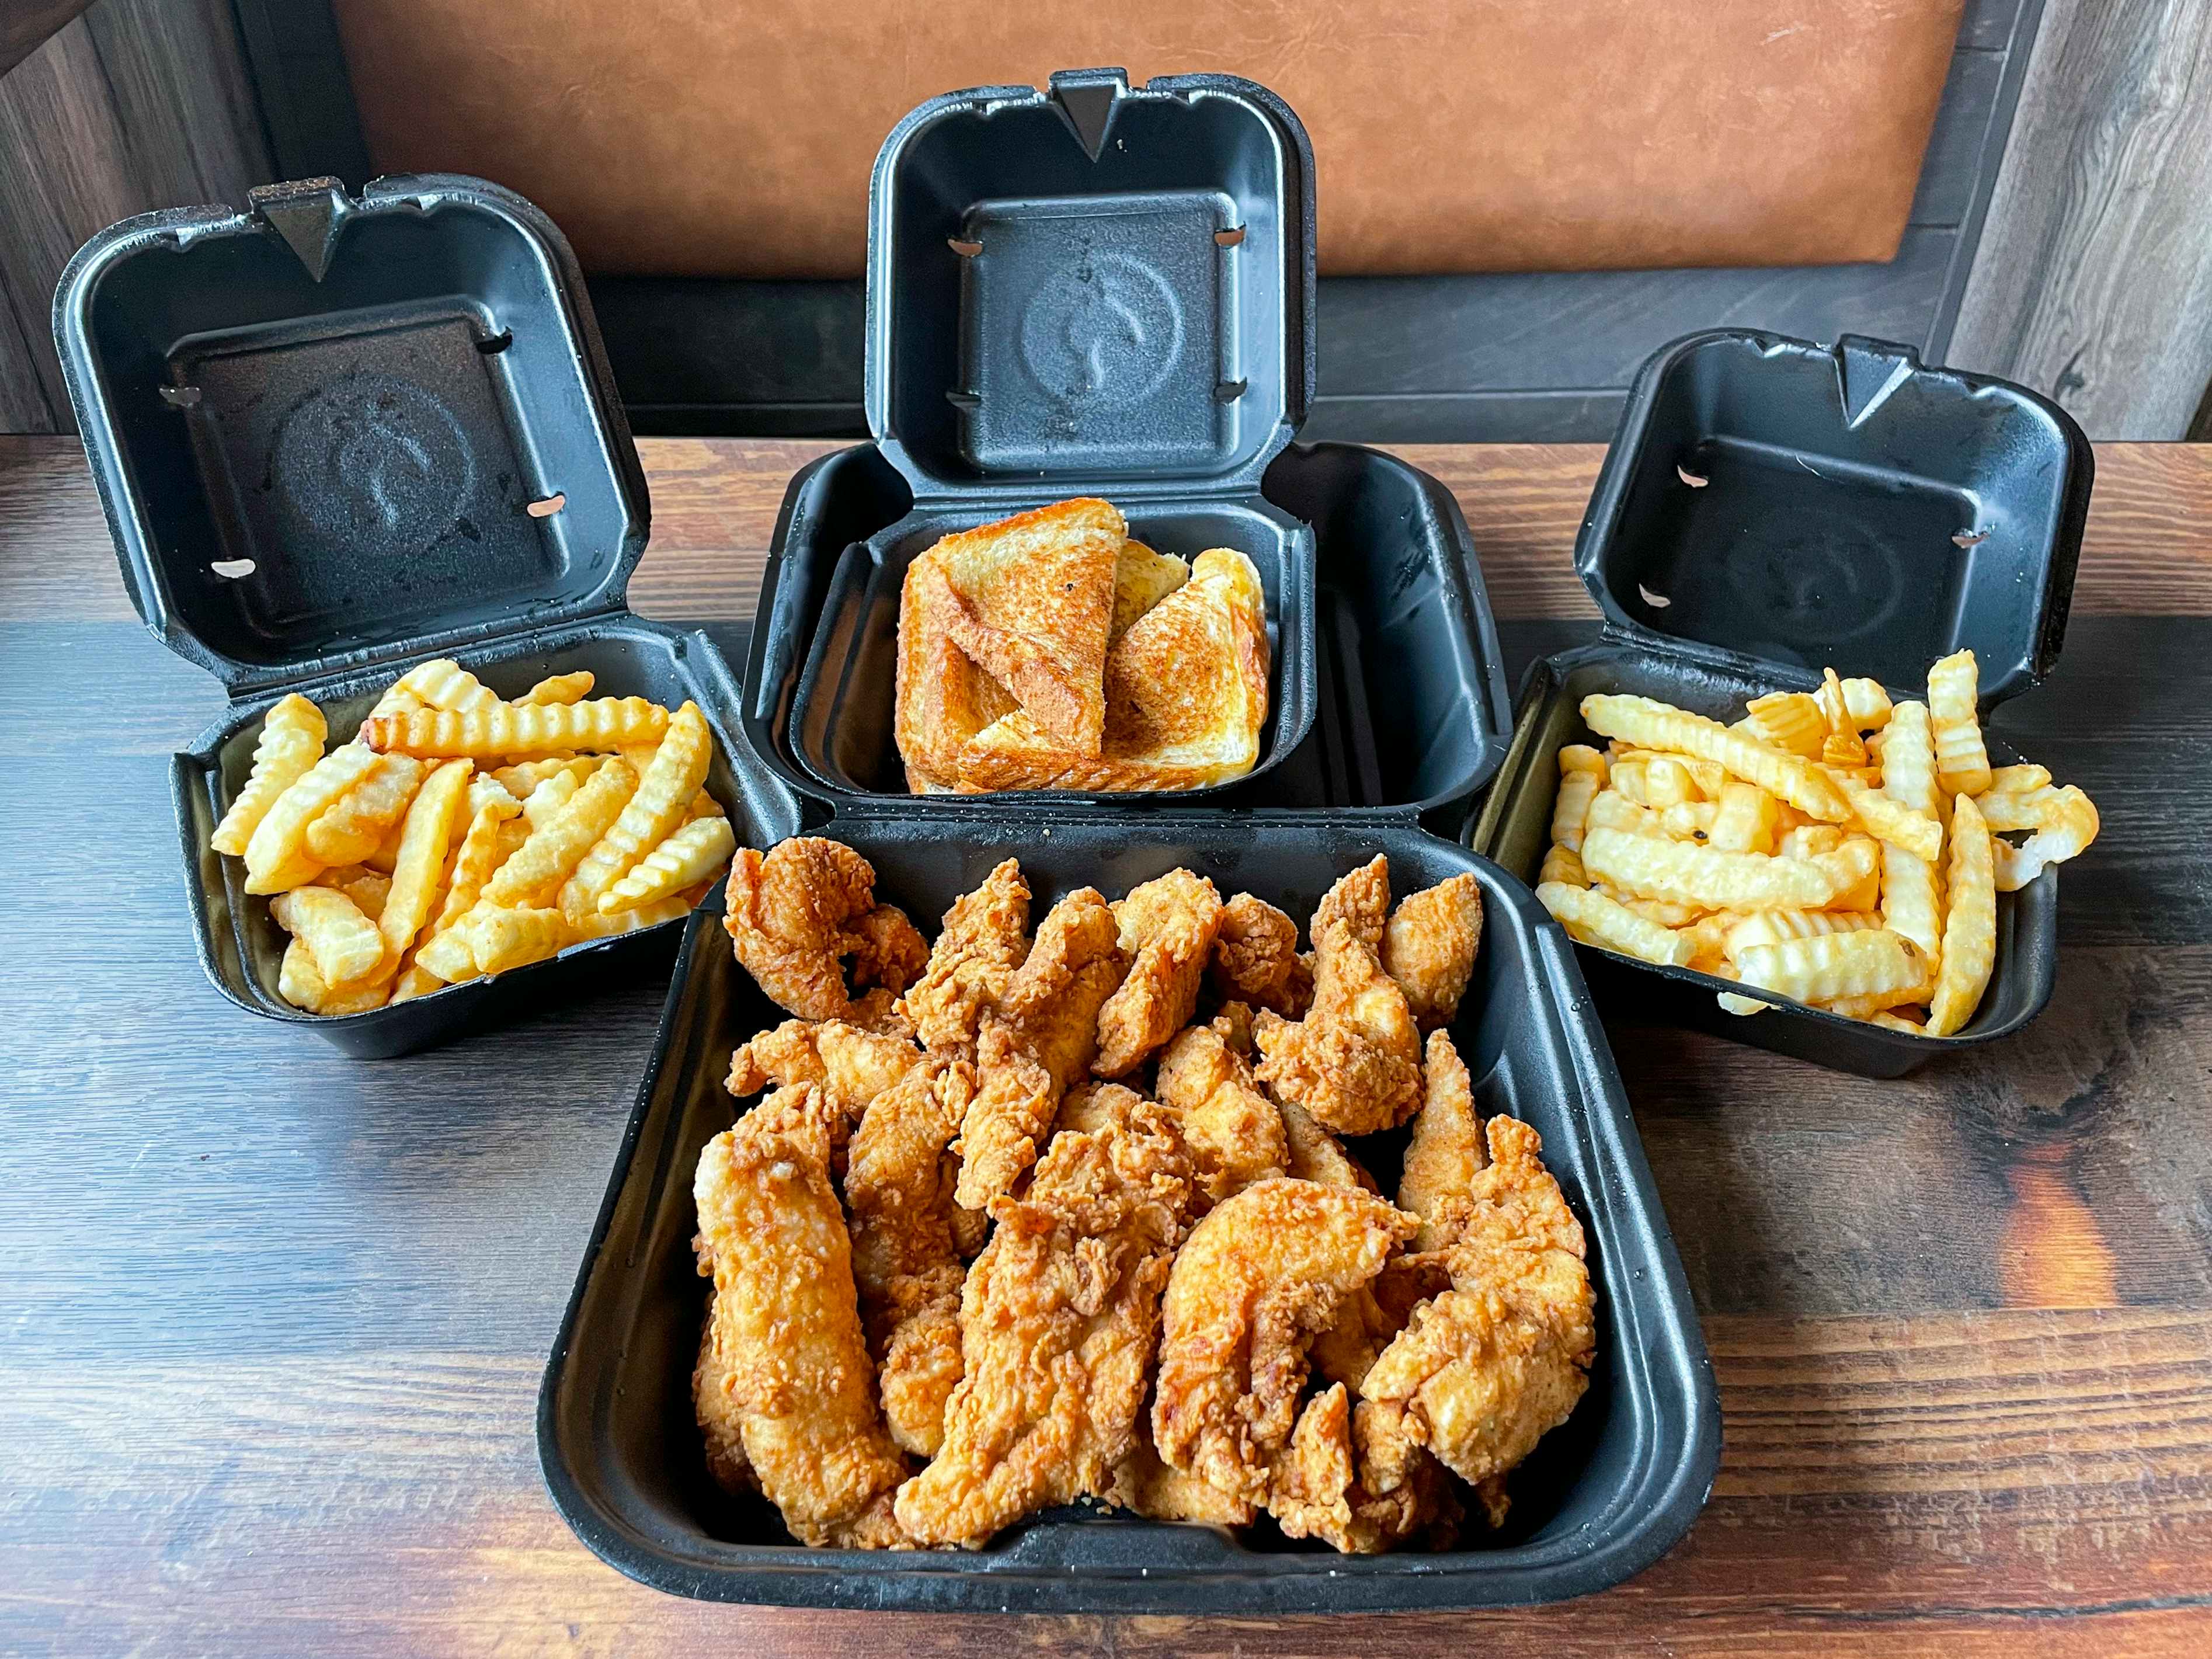 A chicken tender family meal from Zaxby's in open boxes on a table.